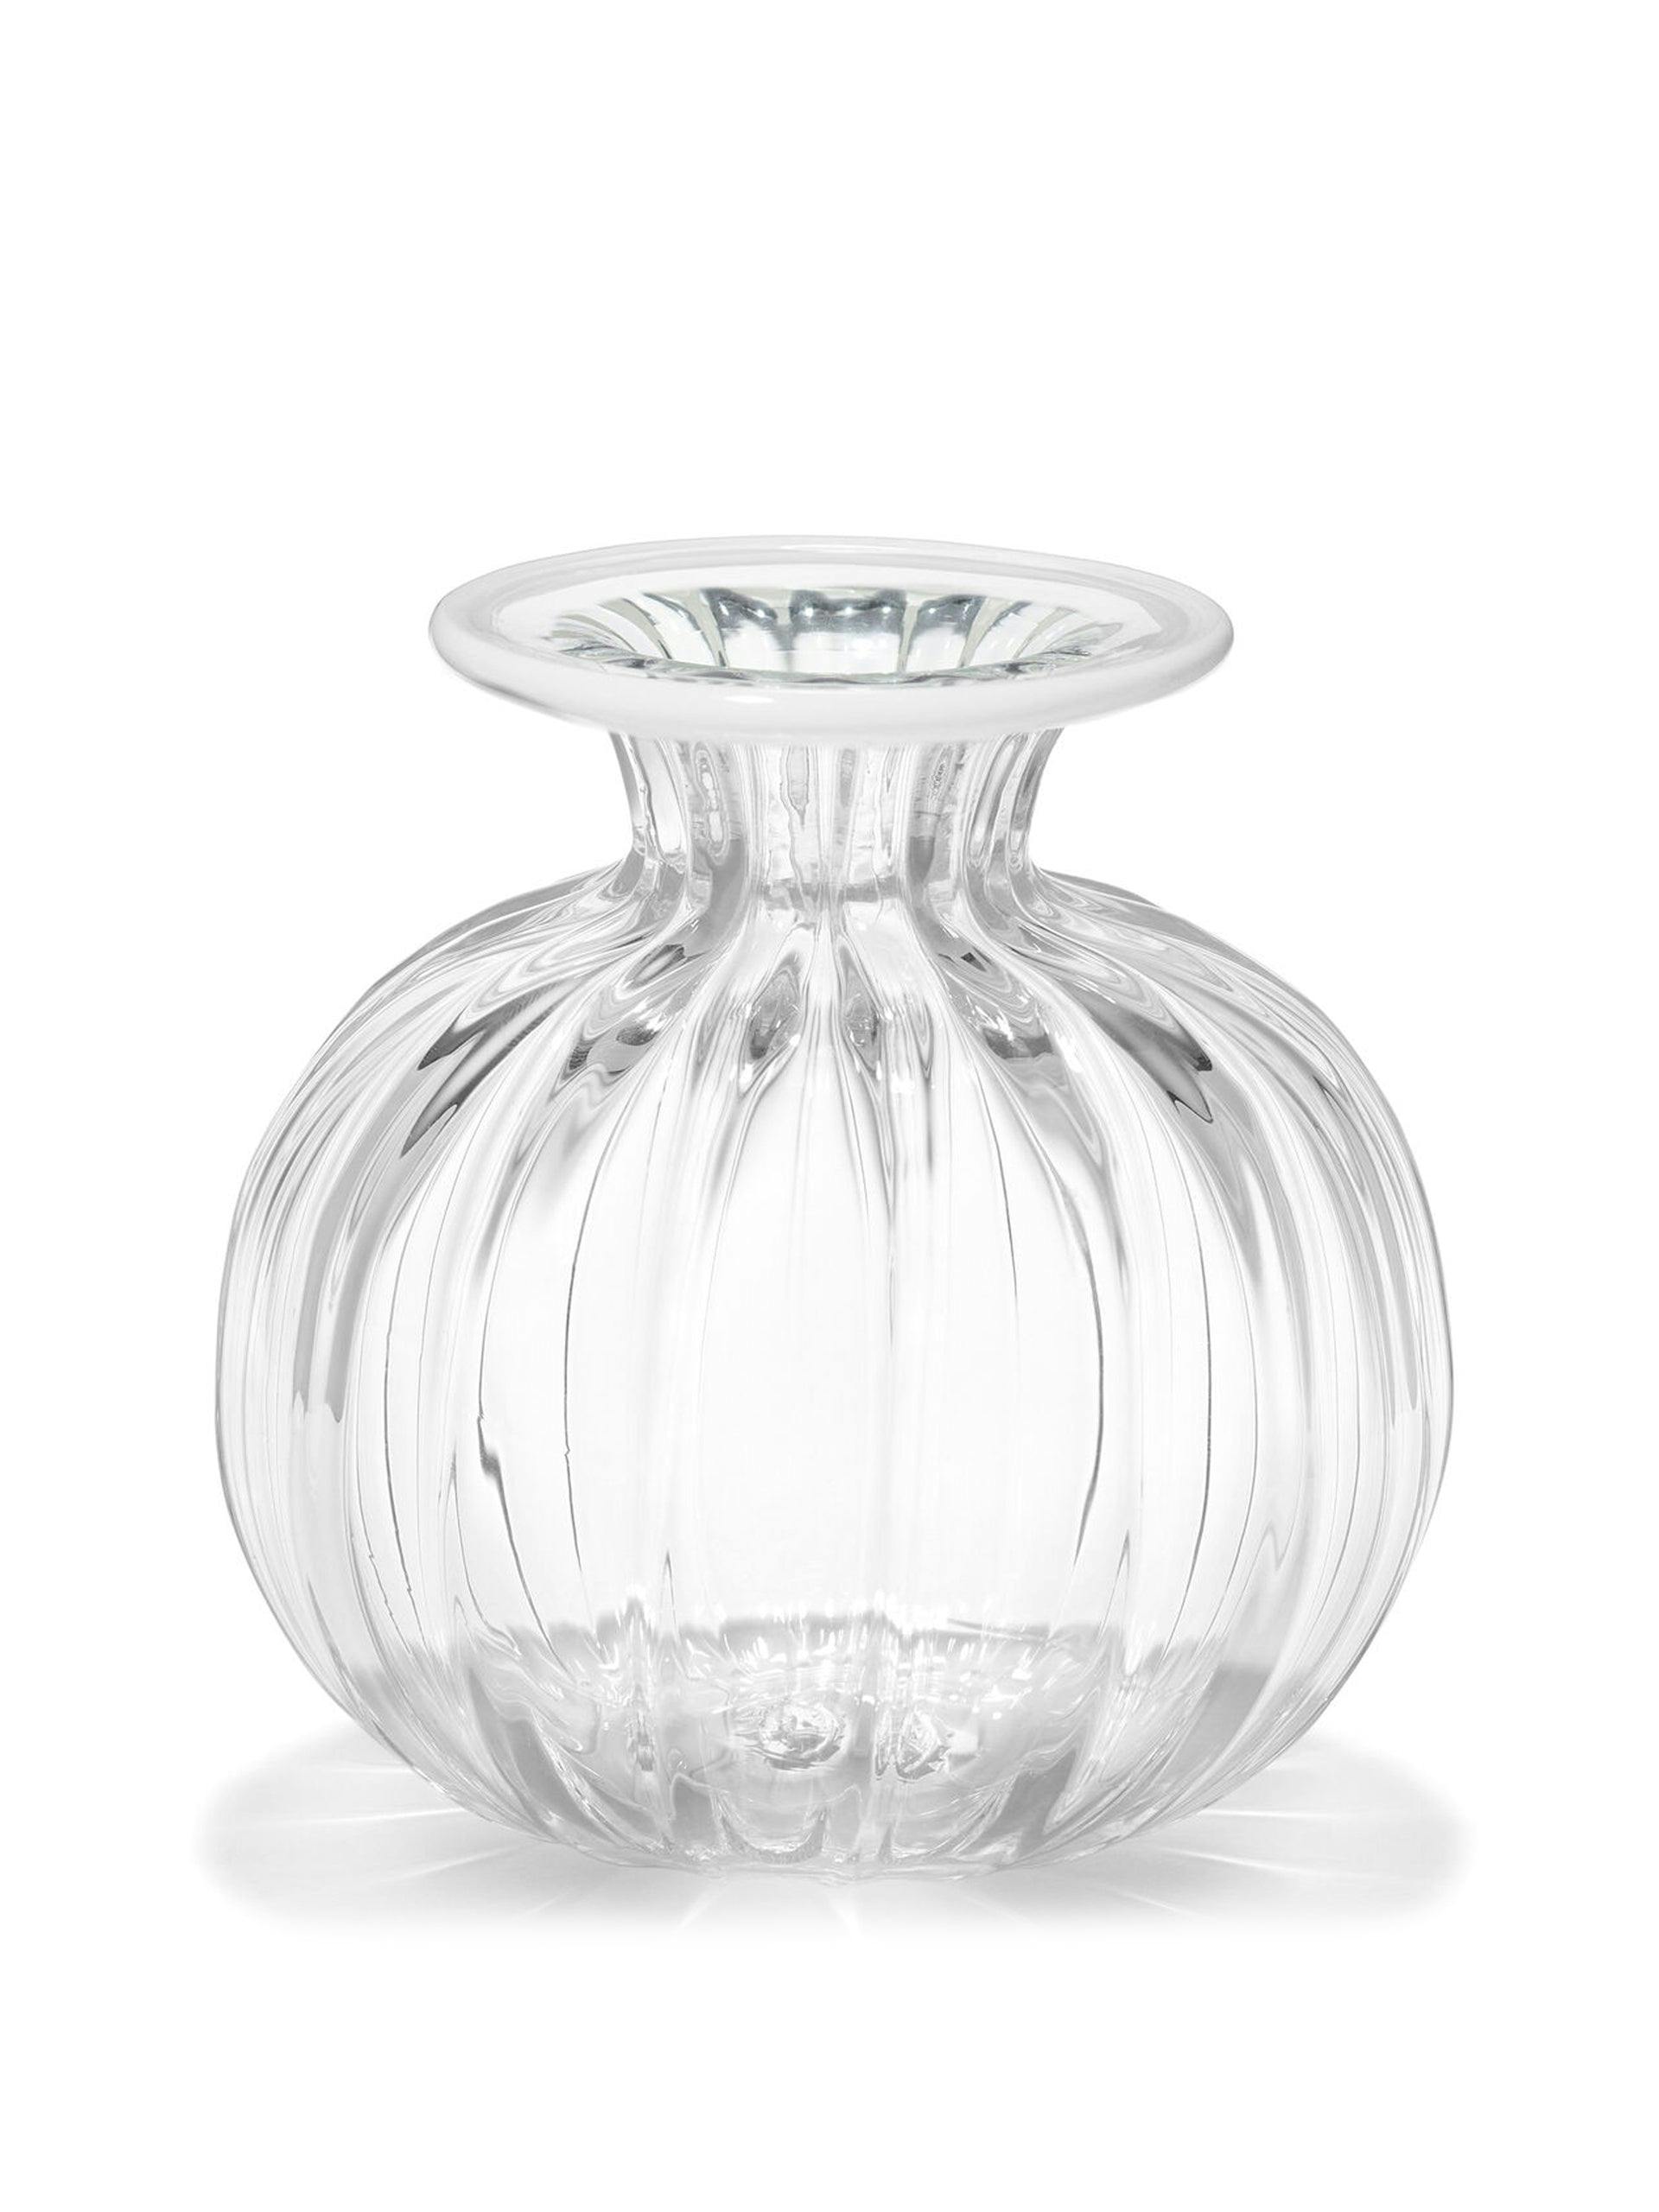 Hand blown rounded bud vase